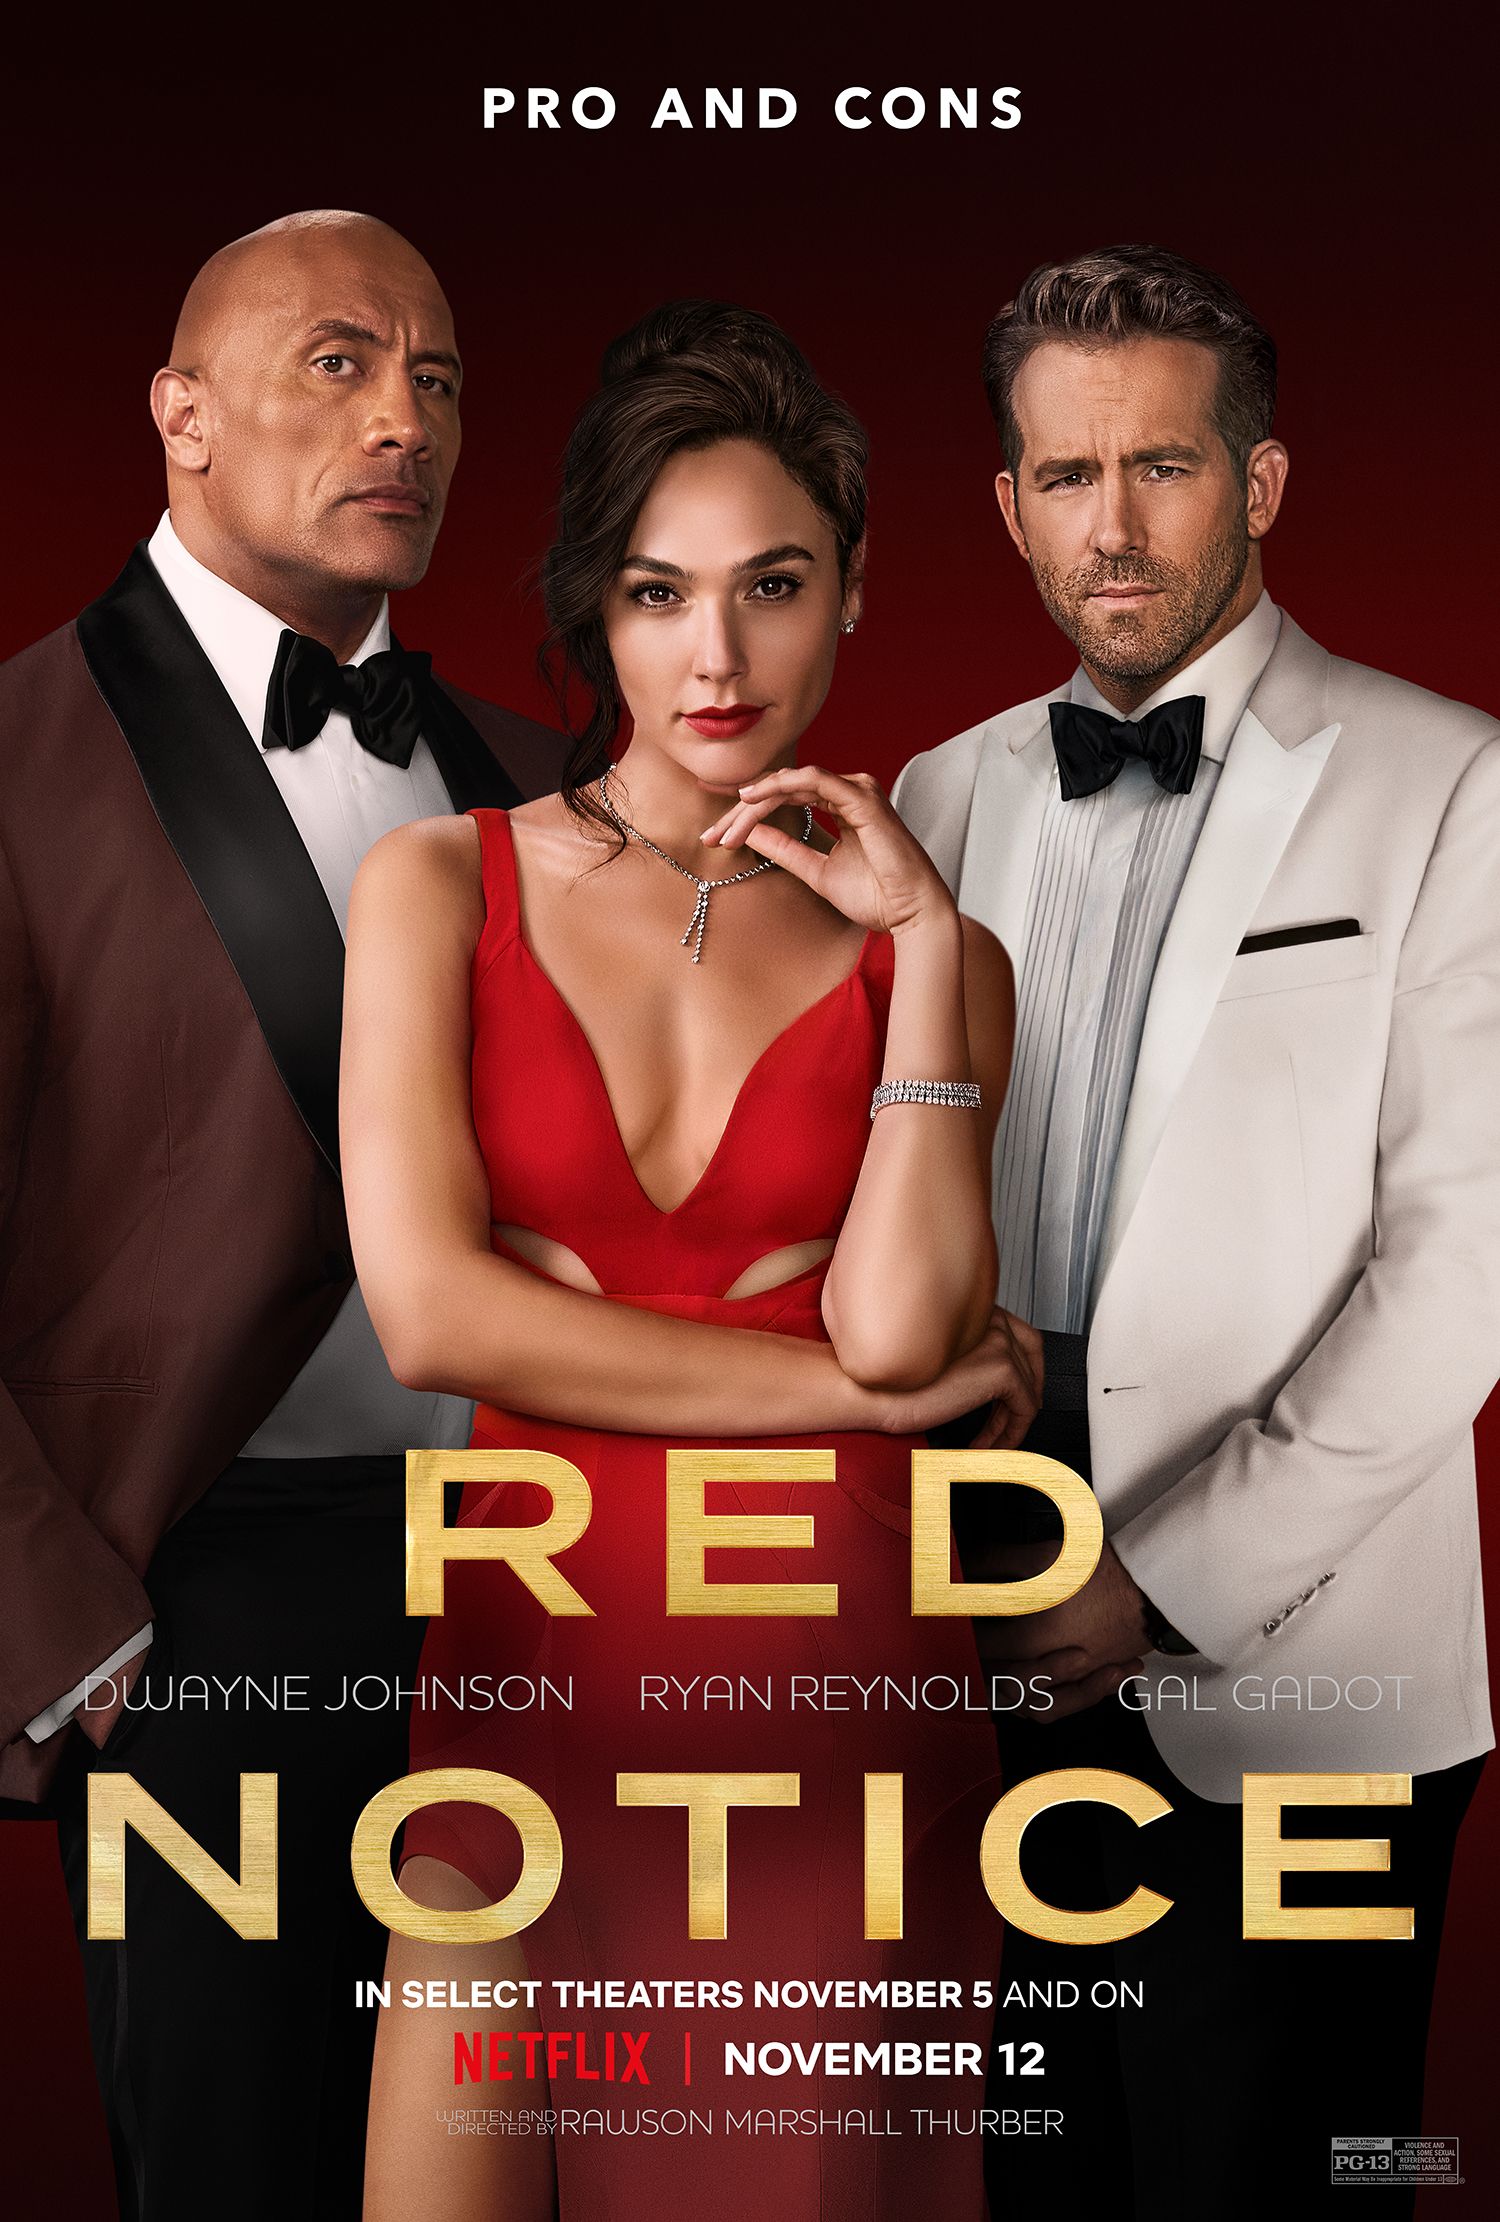 Red Notice (2021) Hindi Dubbed Full Movie